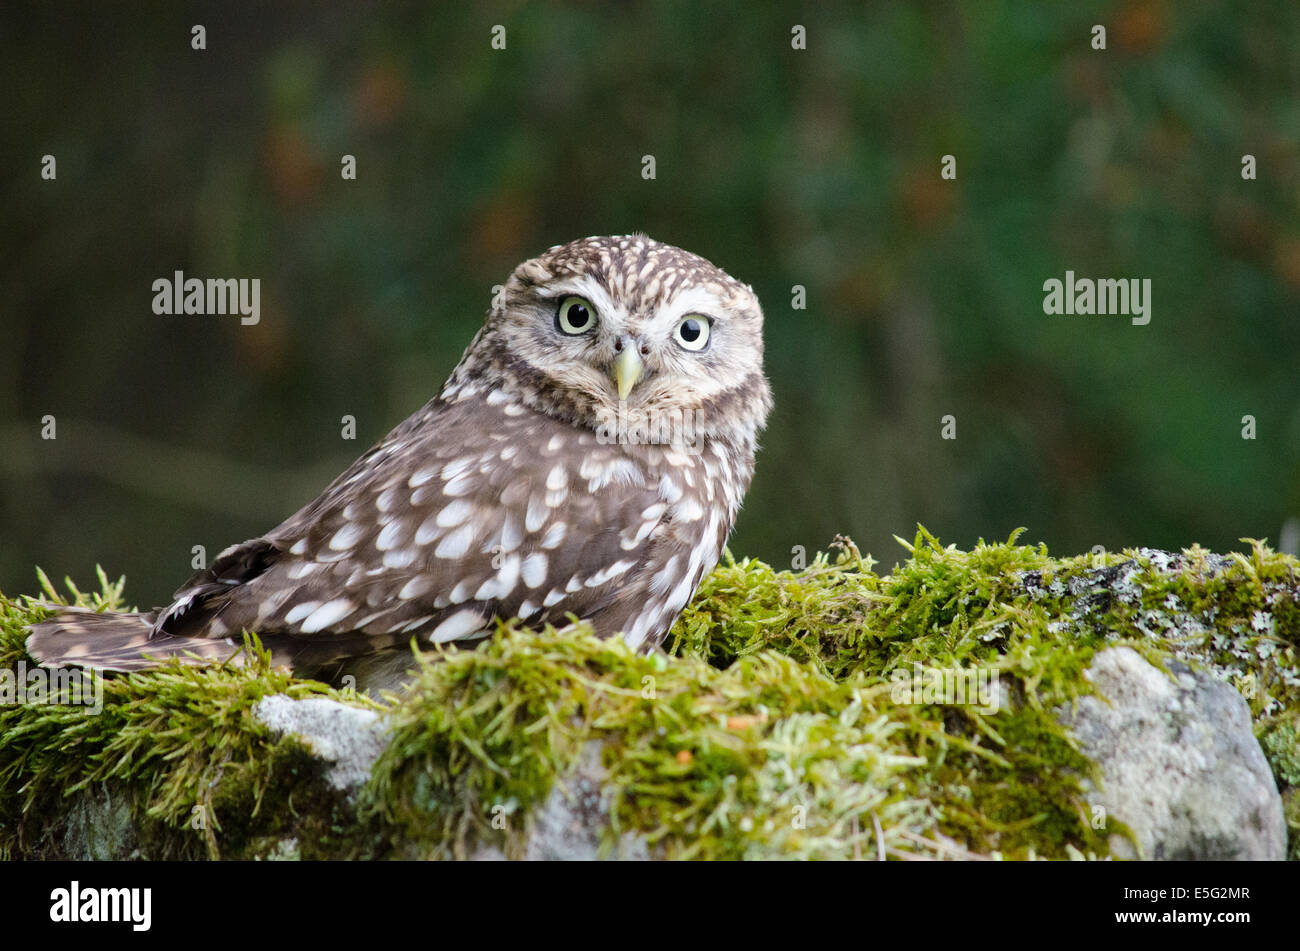 Little owl perched on mossy rock Stock Photo